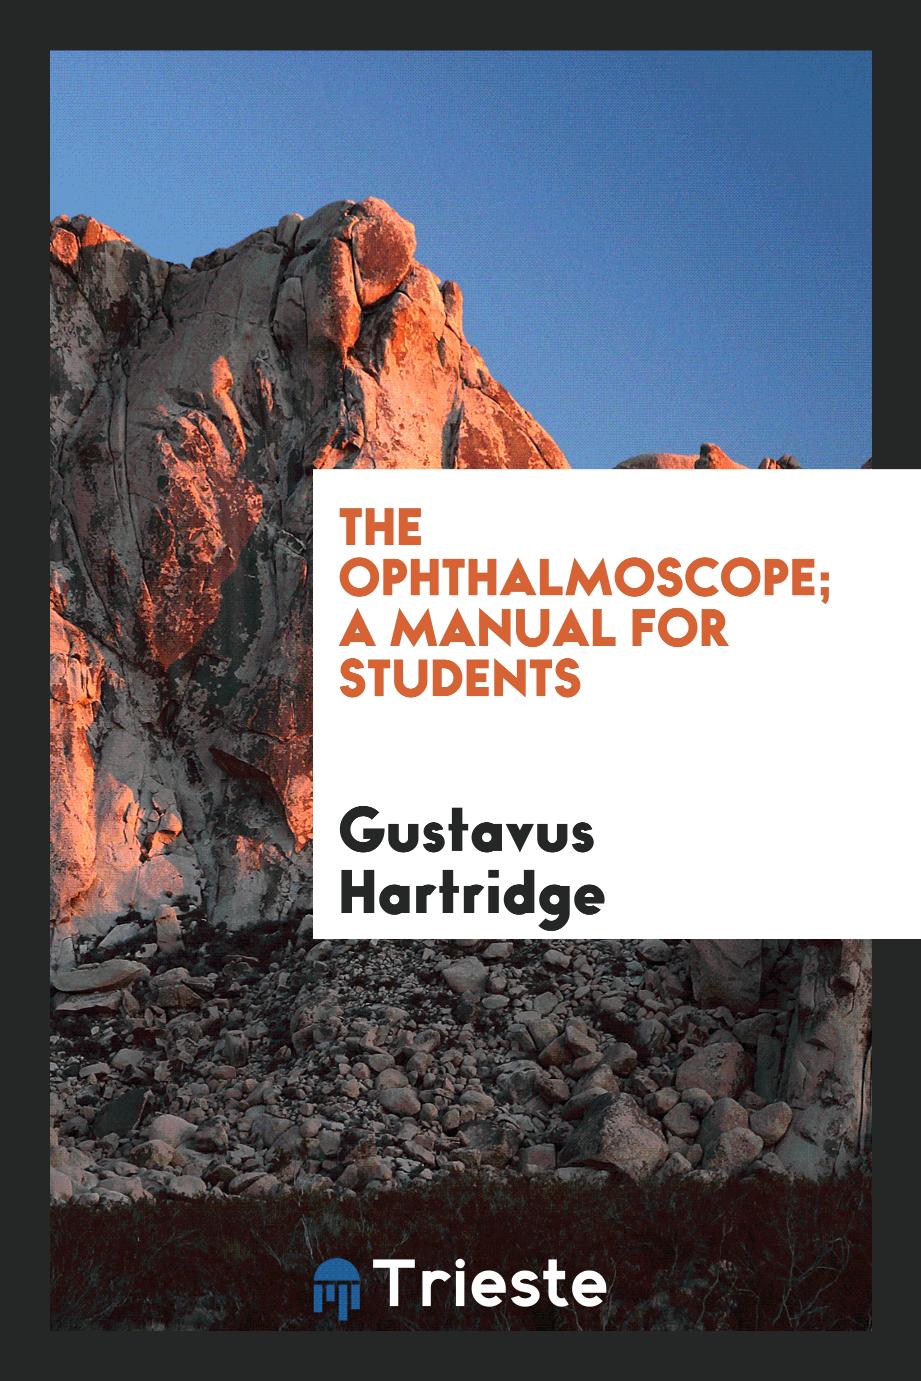 The ophthalmoscope; a manual for students